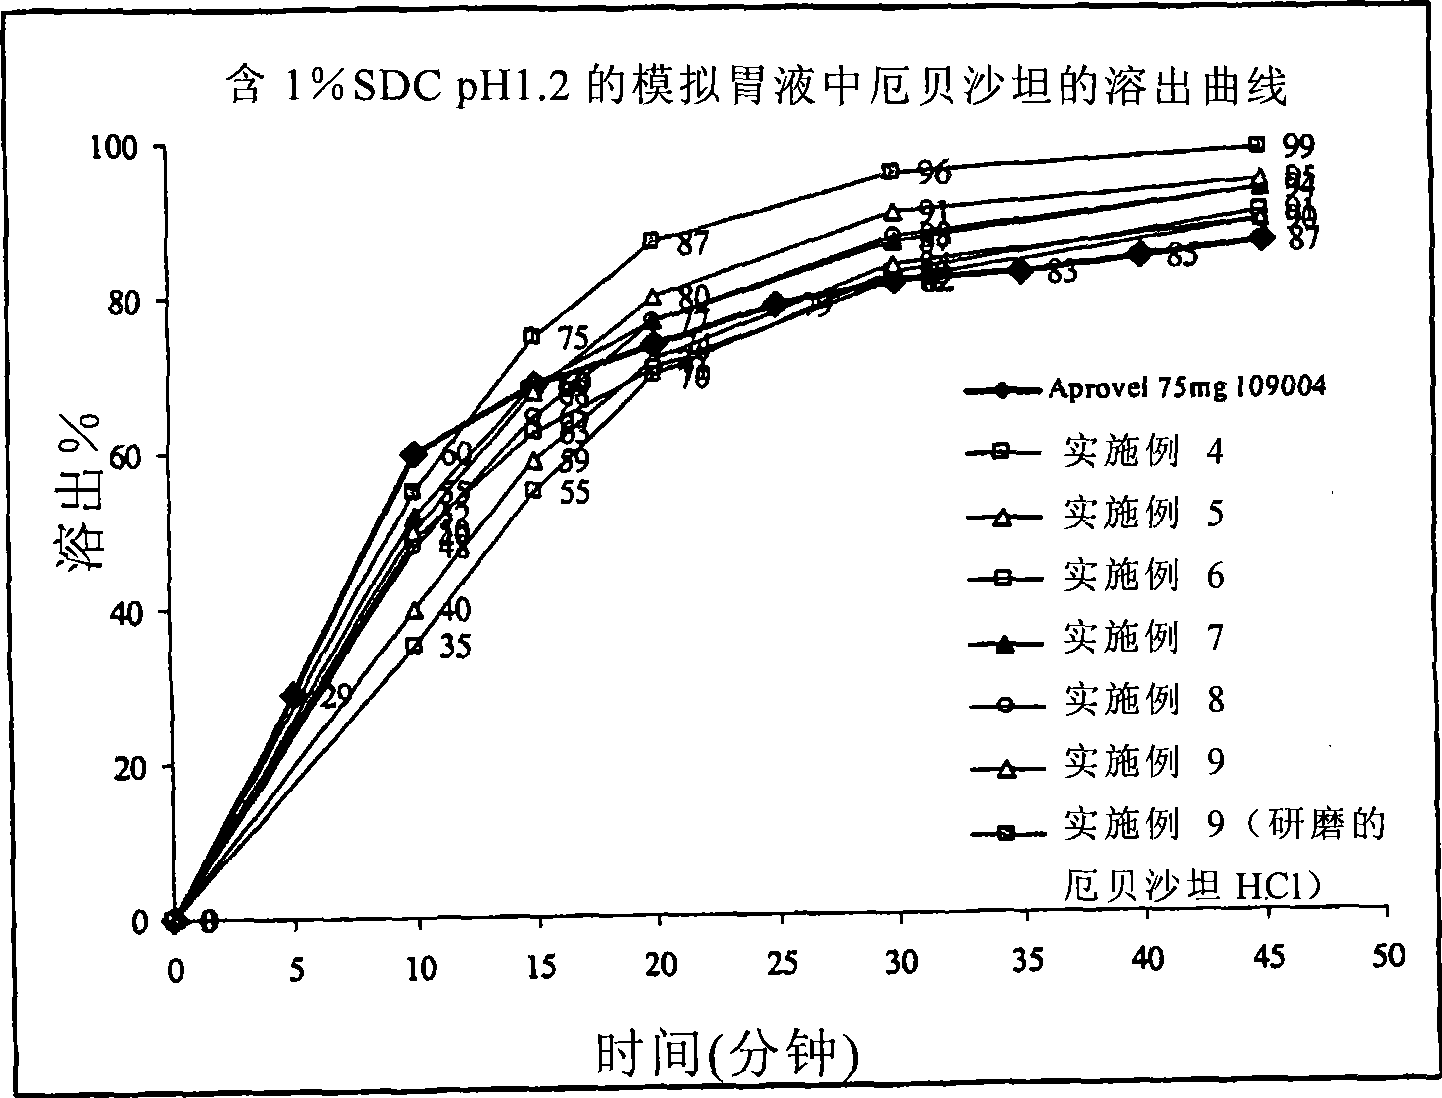 Solid pharmaceutical composition comprising irbesartan